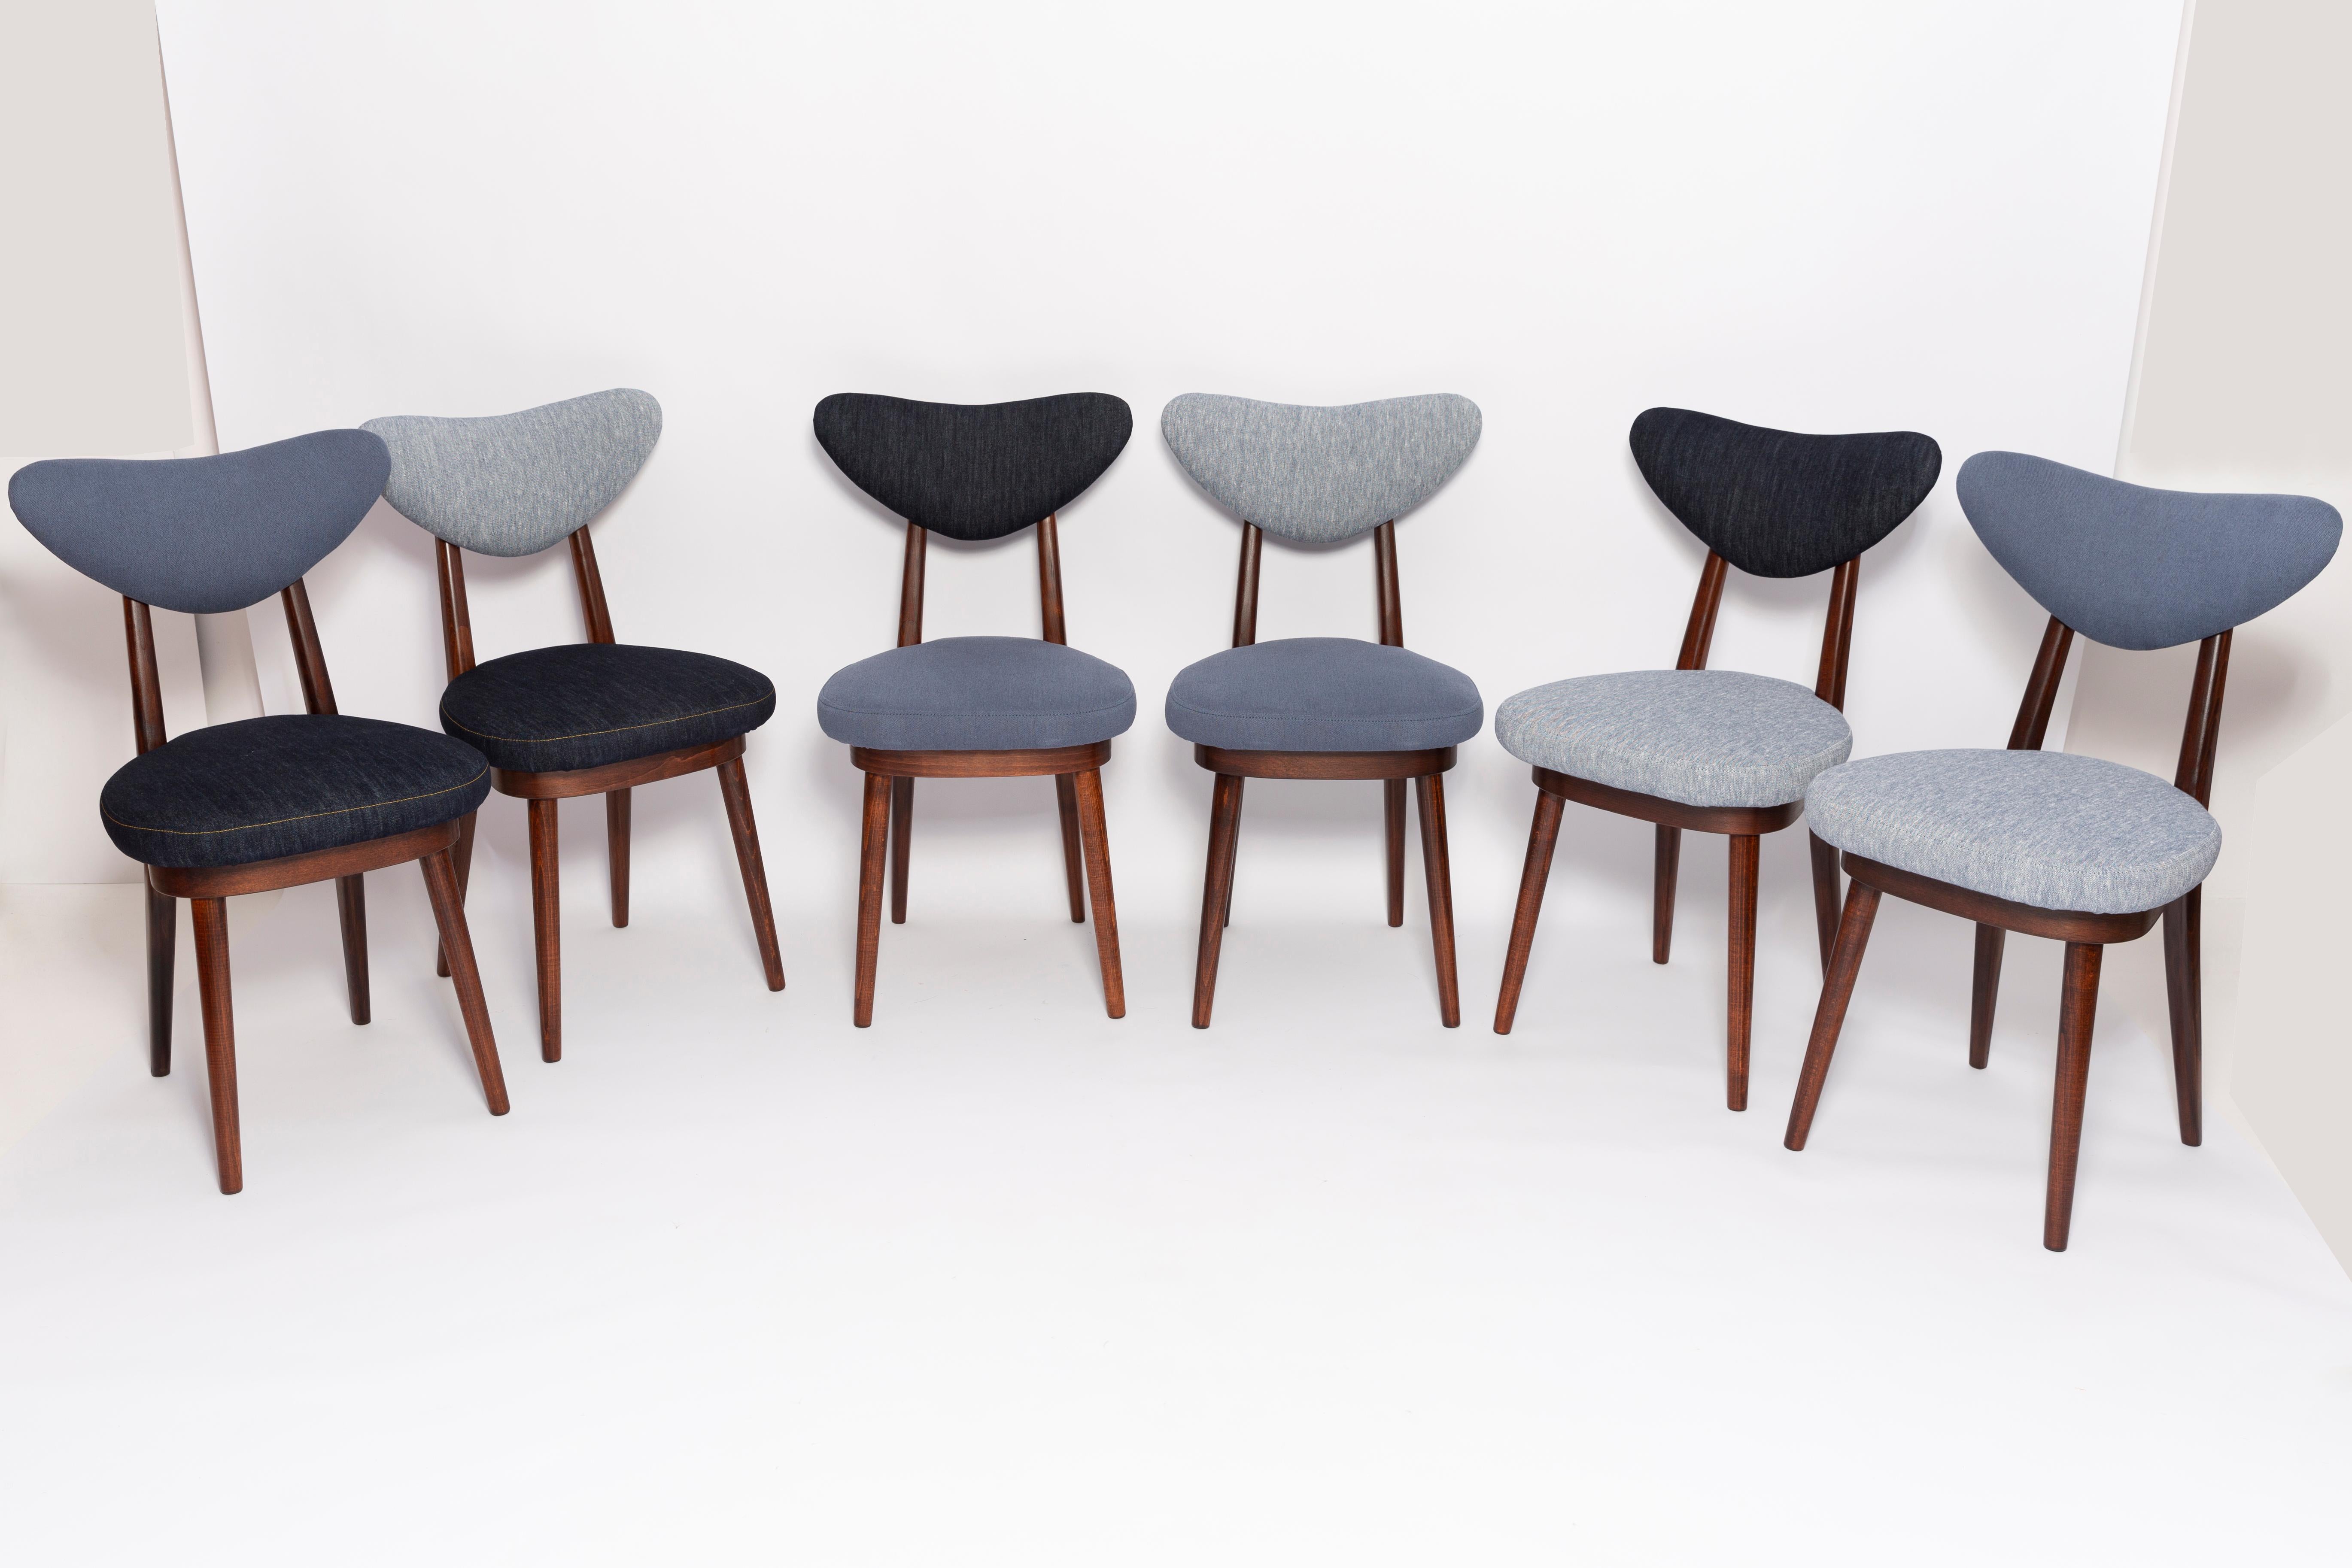 Set of Ten Midcentury Light and Dark Blue Denim Heart Chairs, Europe, 1960s For Sale 6